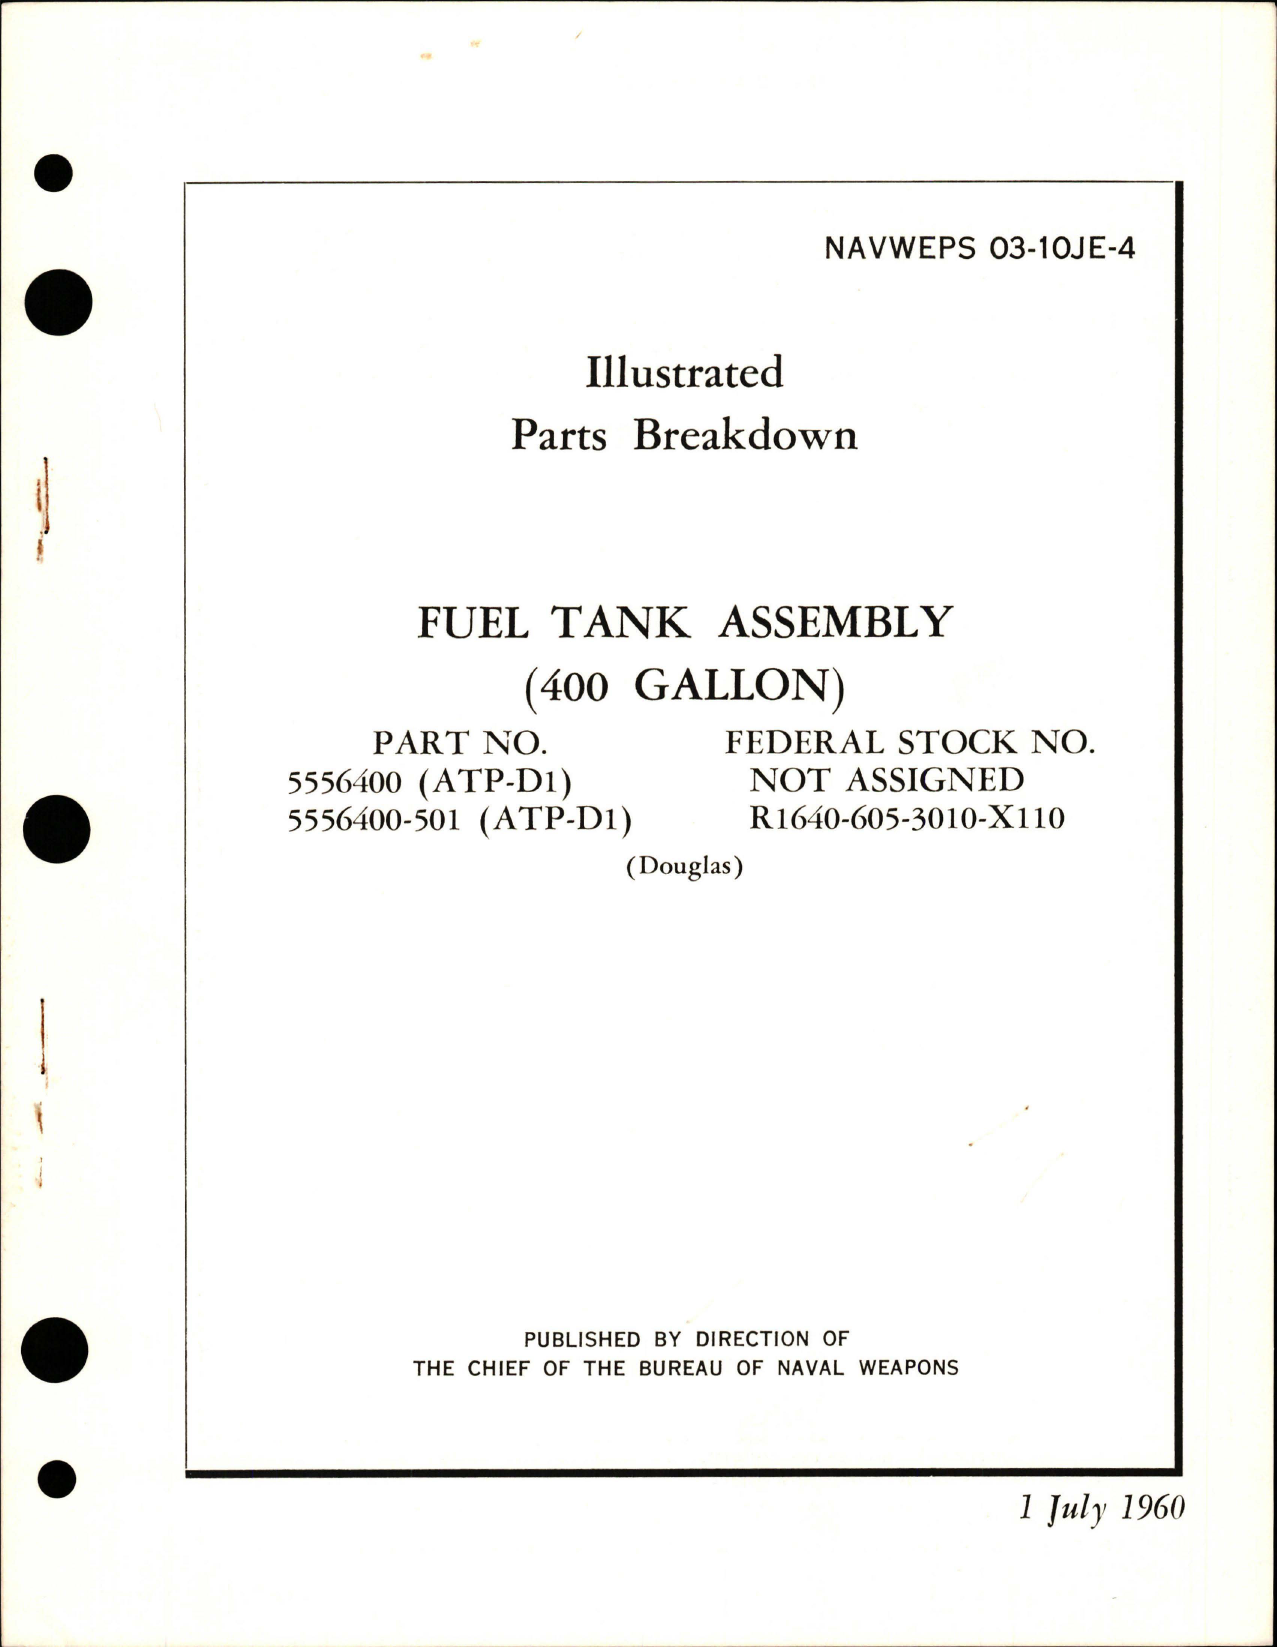 Sample page 1 from AirCorps Library document: Illustrated Parts Breakdown for Fuel Tank Assembly - 400 Gallon - Part 5556400 and 5556400-501